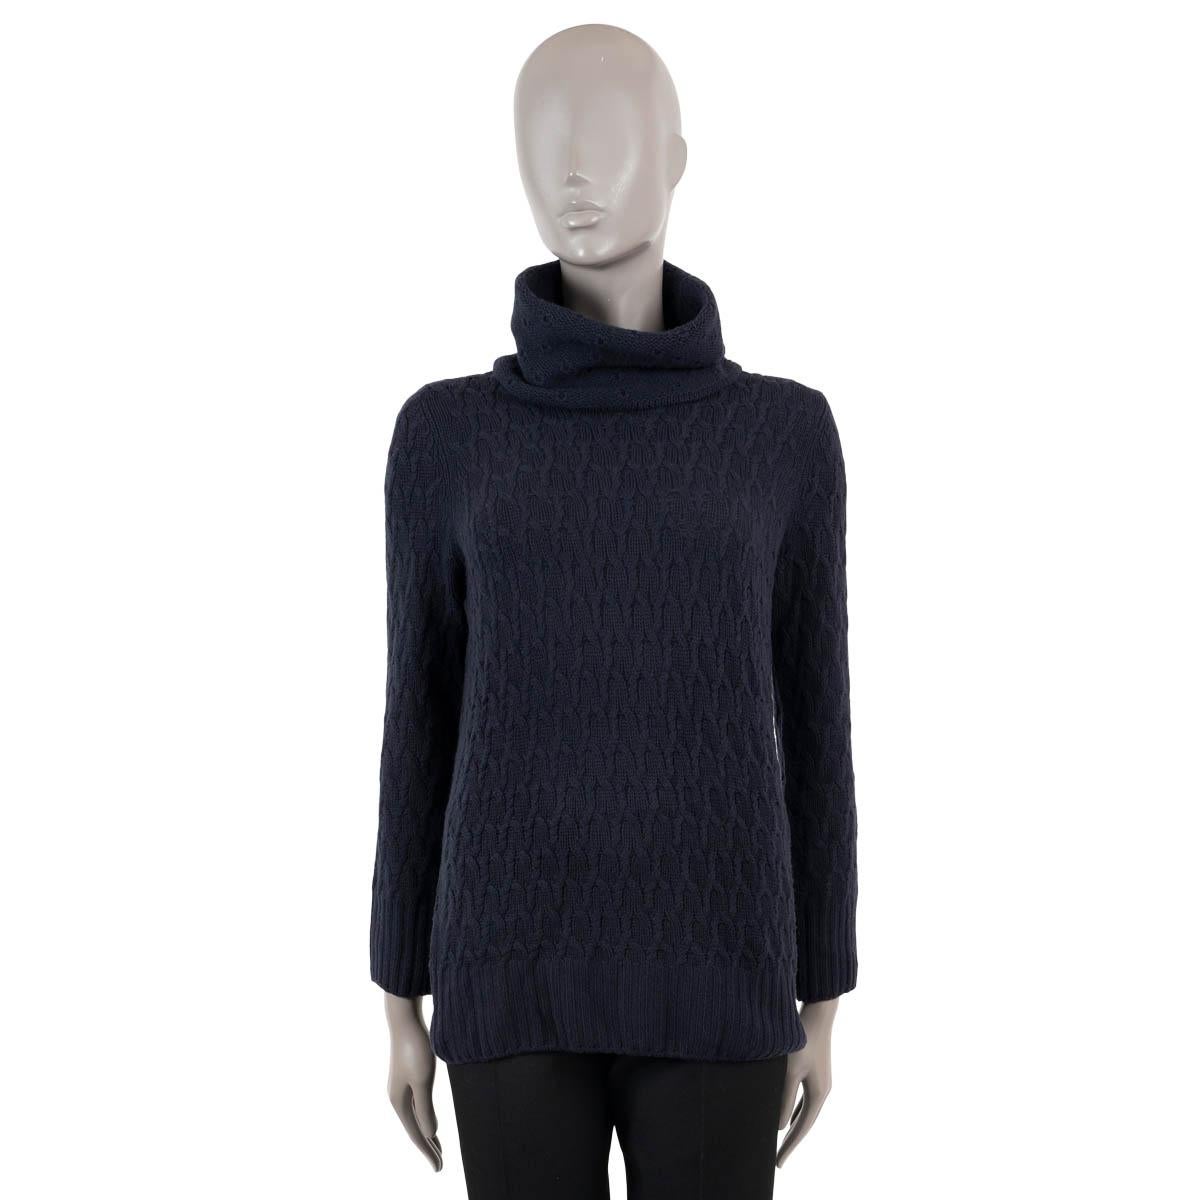 LORO PIANA navy blue VICUNA CABLE KNIT TURTLENECK Sweater 40 S In Excellent Condition For Sale In Zürich, CH